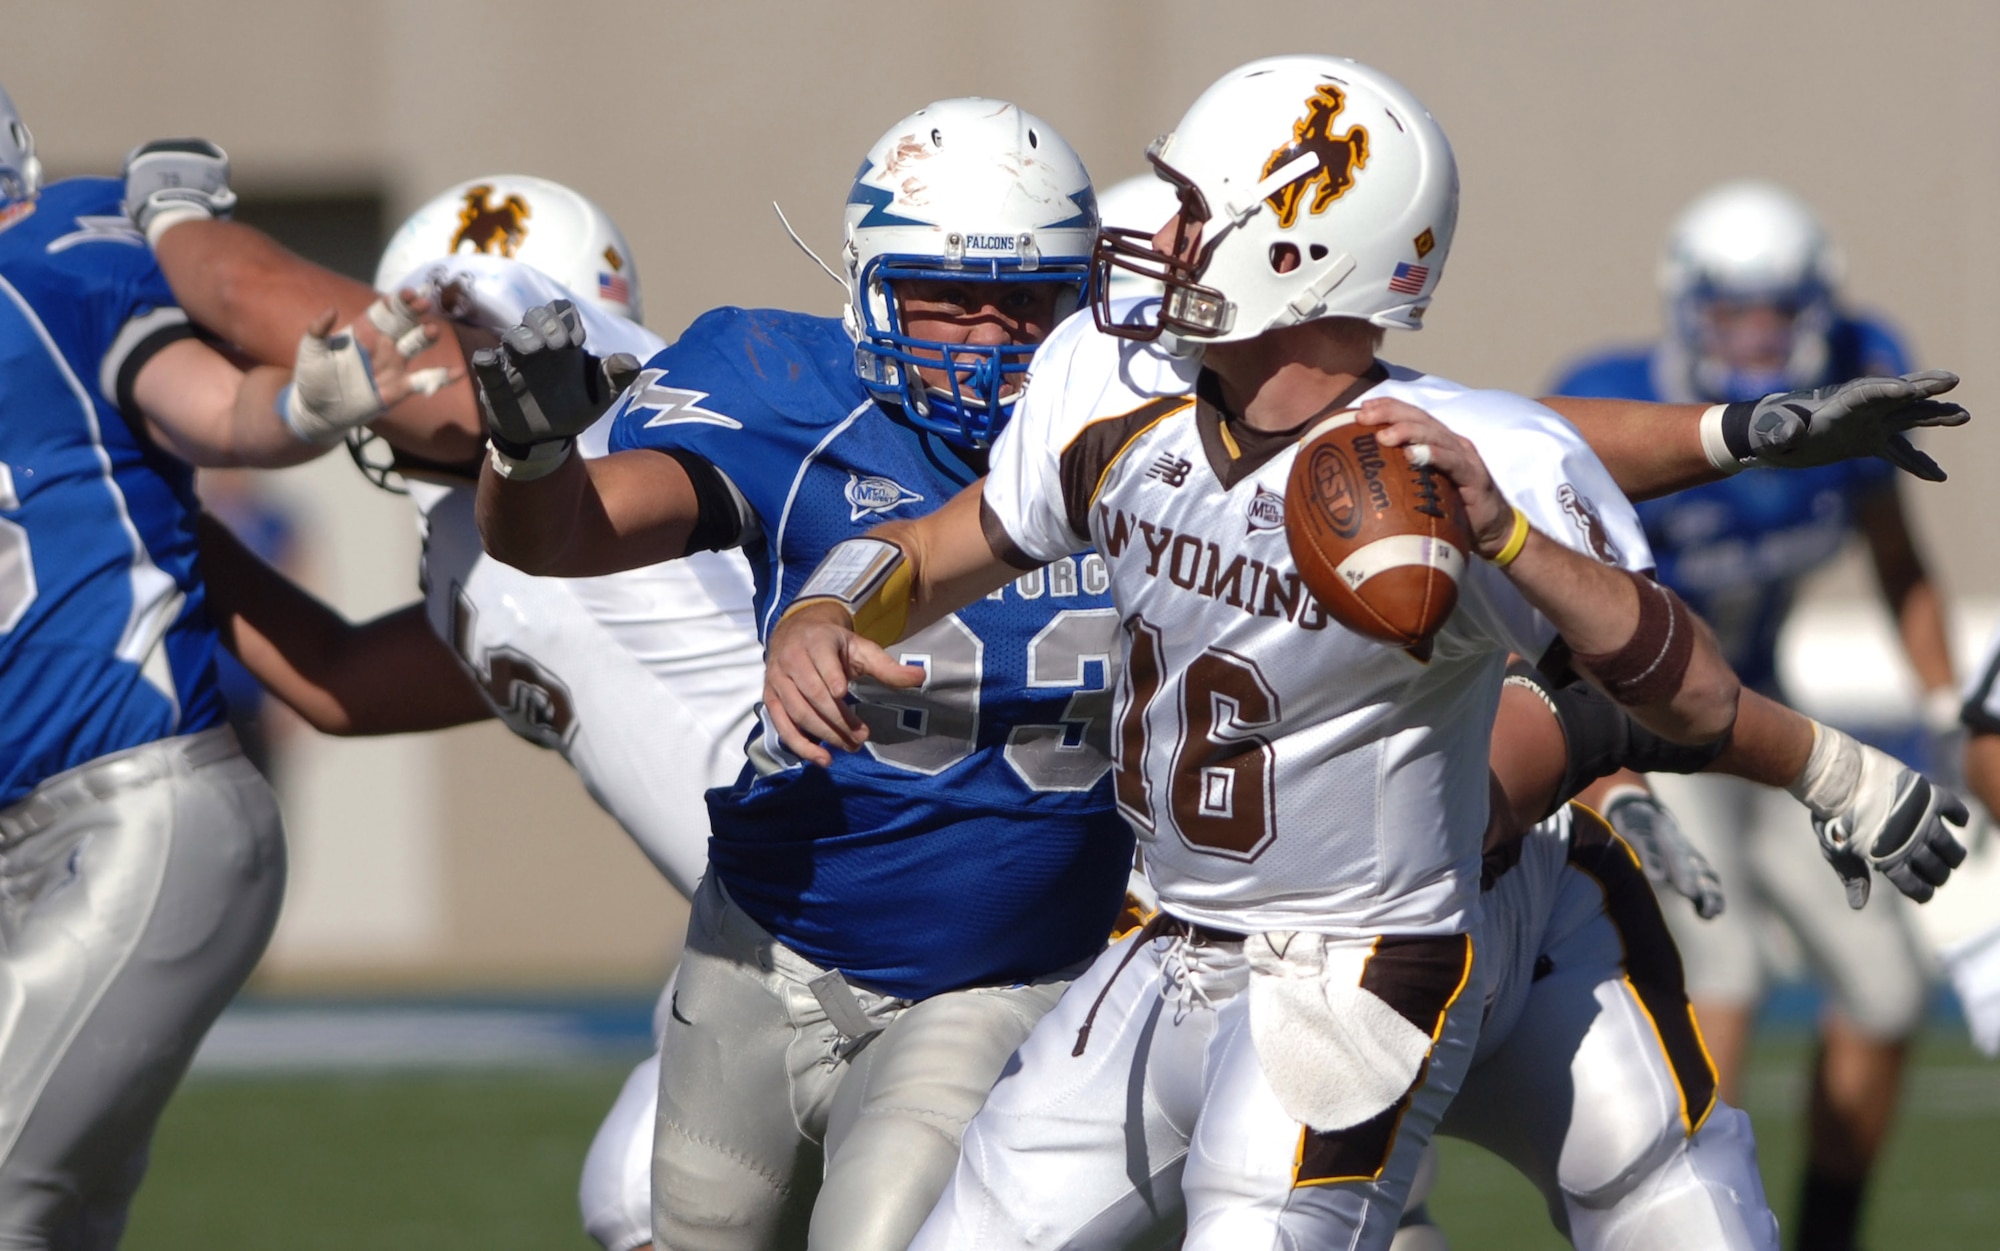 U.S. Air Force Academy Falcons nose guard Ben Garland pressures Wyoming quarterback Karsten Sween during Air Force's 20-12 win Oct. 20 at Falcon Stadium in Colorado. The Air Force defense sacked Sween twice and forced him to throw three interceptions. (U.S. Air Force photo/Dave Armer) 
